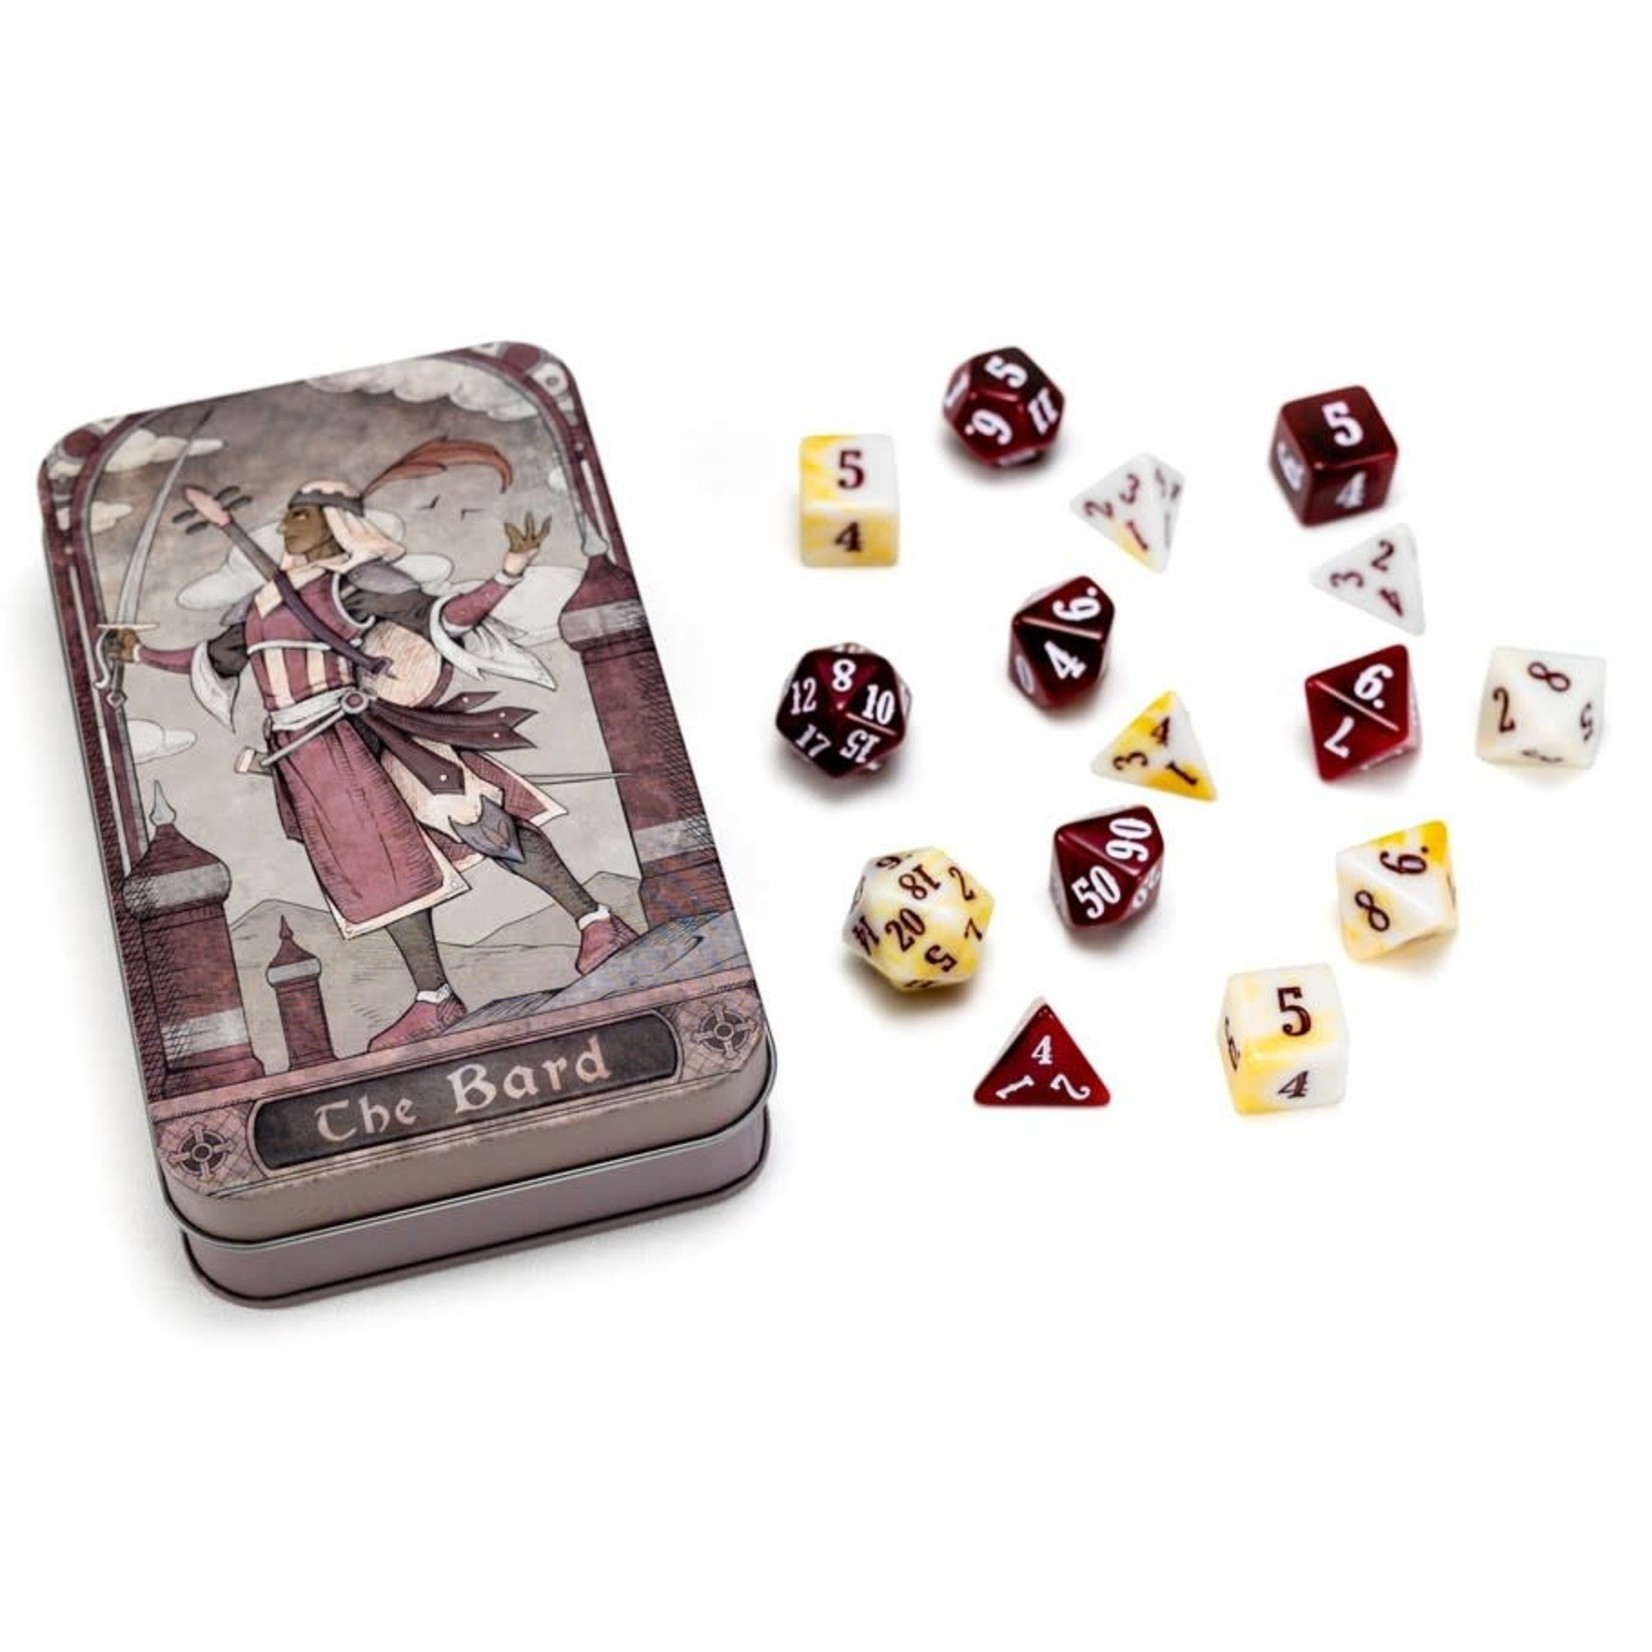 Beadle & Grimm RPG Class Dice Set: The Bard